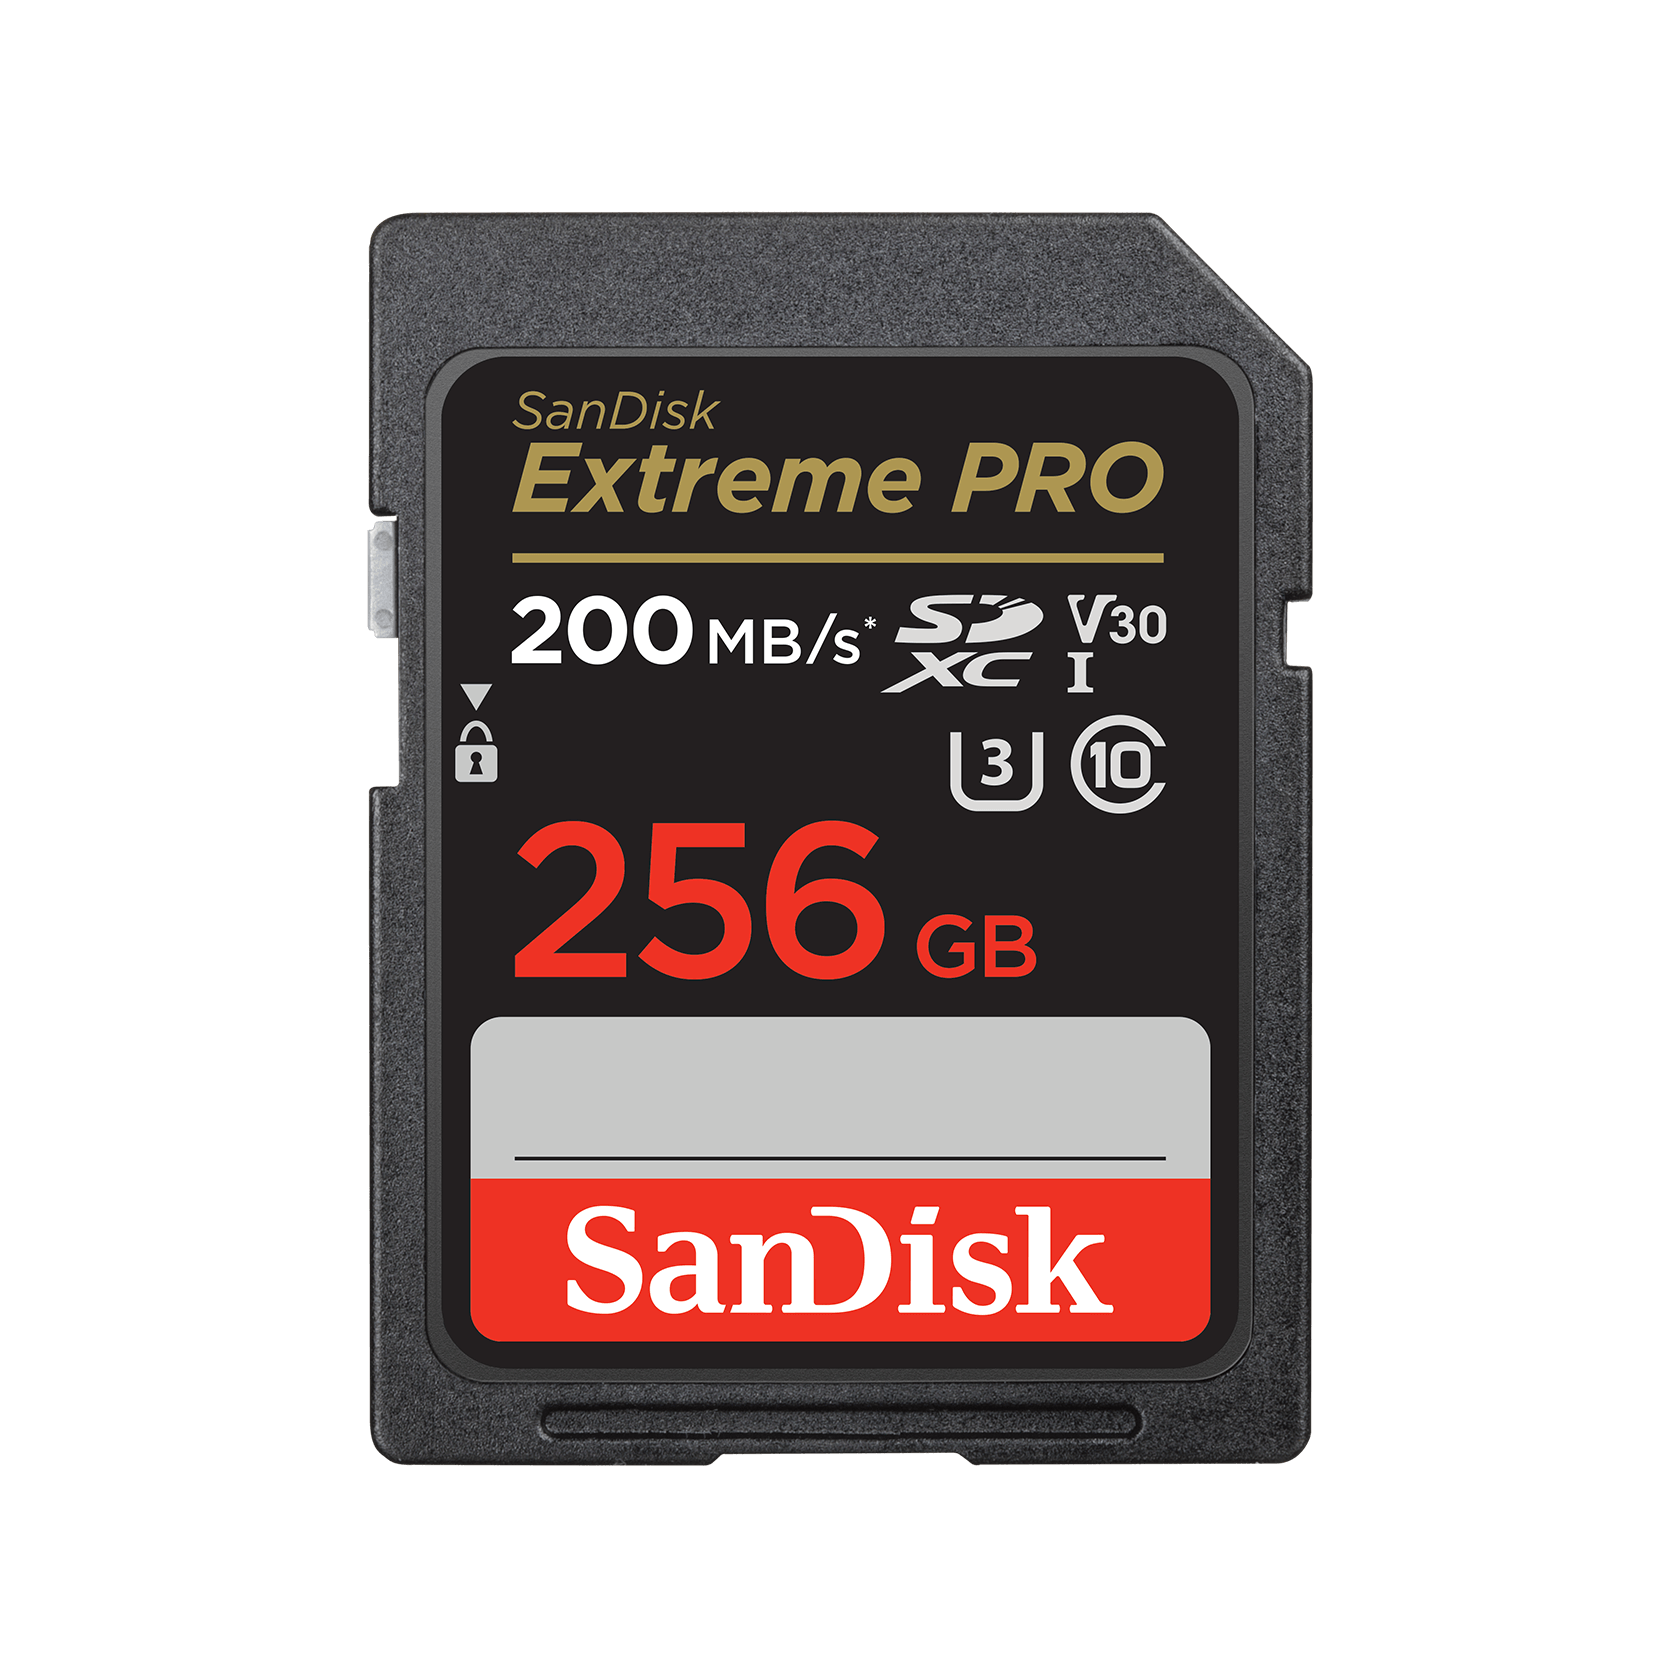 SanDisk Extreme PROÂ® SDHCâ„¢ And SDXCâ„¢ UHS-I Memory Card - 256GB - SDSDXXD-256G-GN4IN